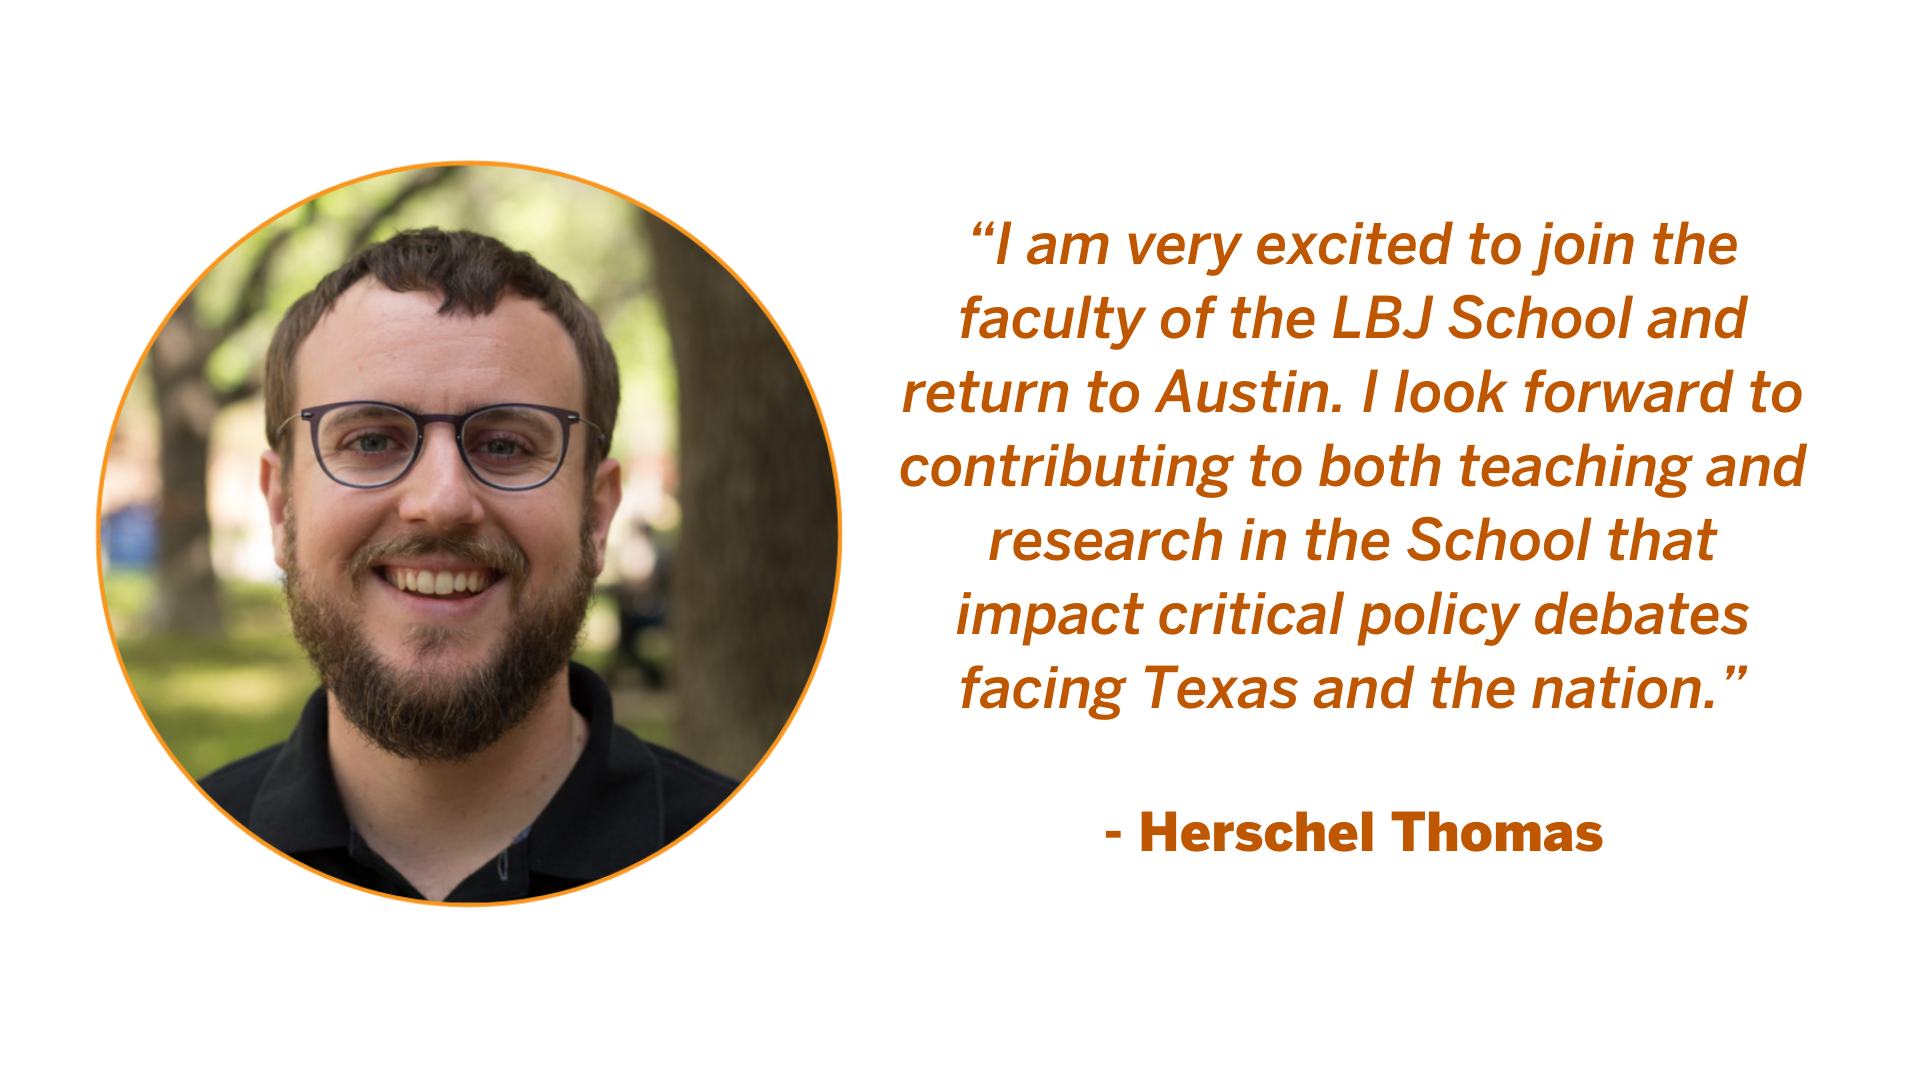 Herschel Thomas Quote: “I am very excited to join the faculty of the LBJ School and return to Austin. I look forward to contributing to both teaching and research in the School that impact critical policy debates facing Texas and the nation.”